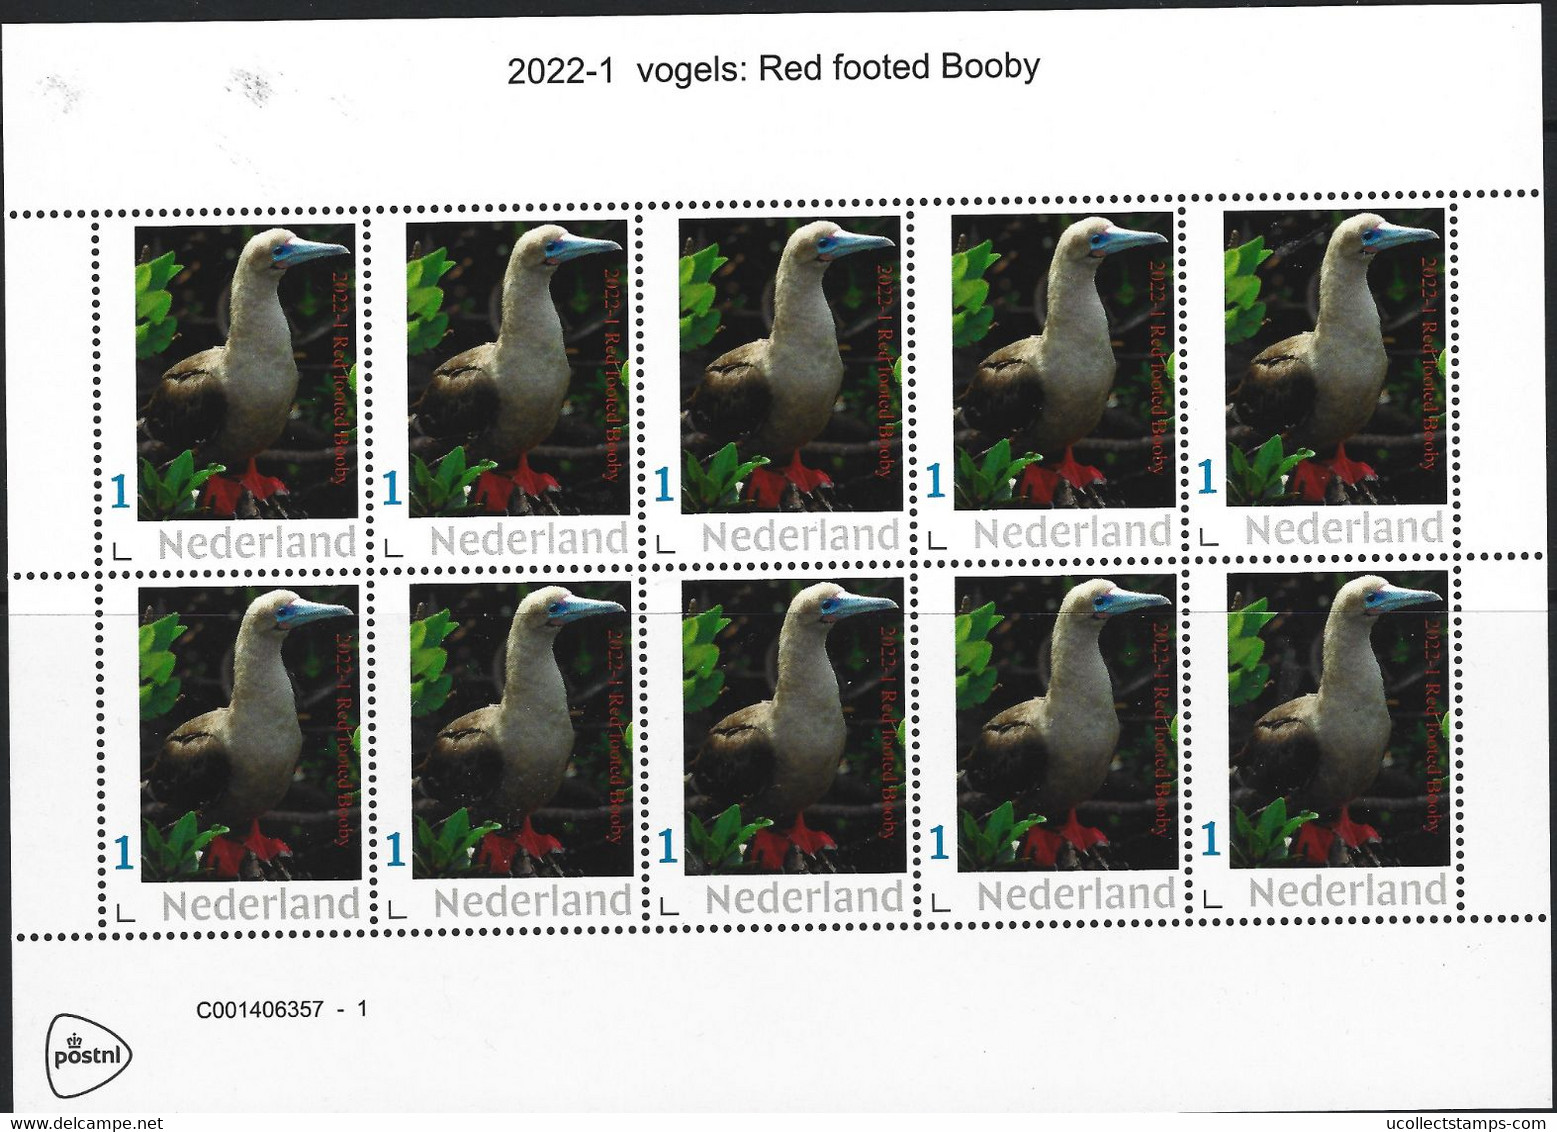 Nederland  2022-1  Vogels  Red Footed Booby    Vel-sheetlet    Postfris/mnh/neuf - Neufs